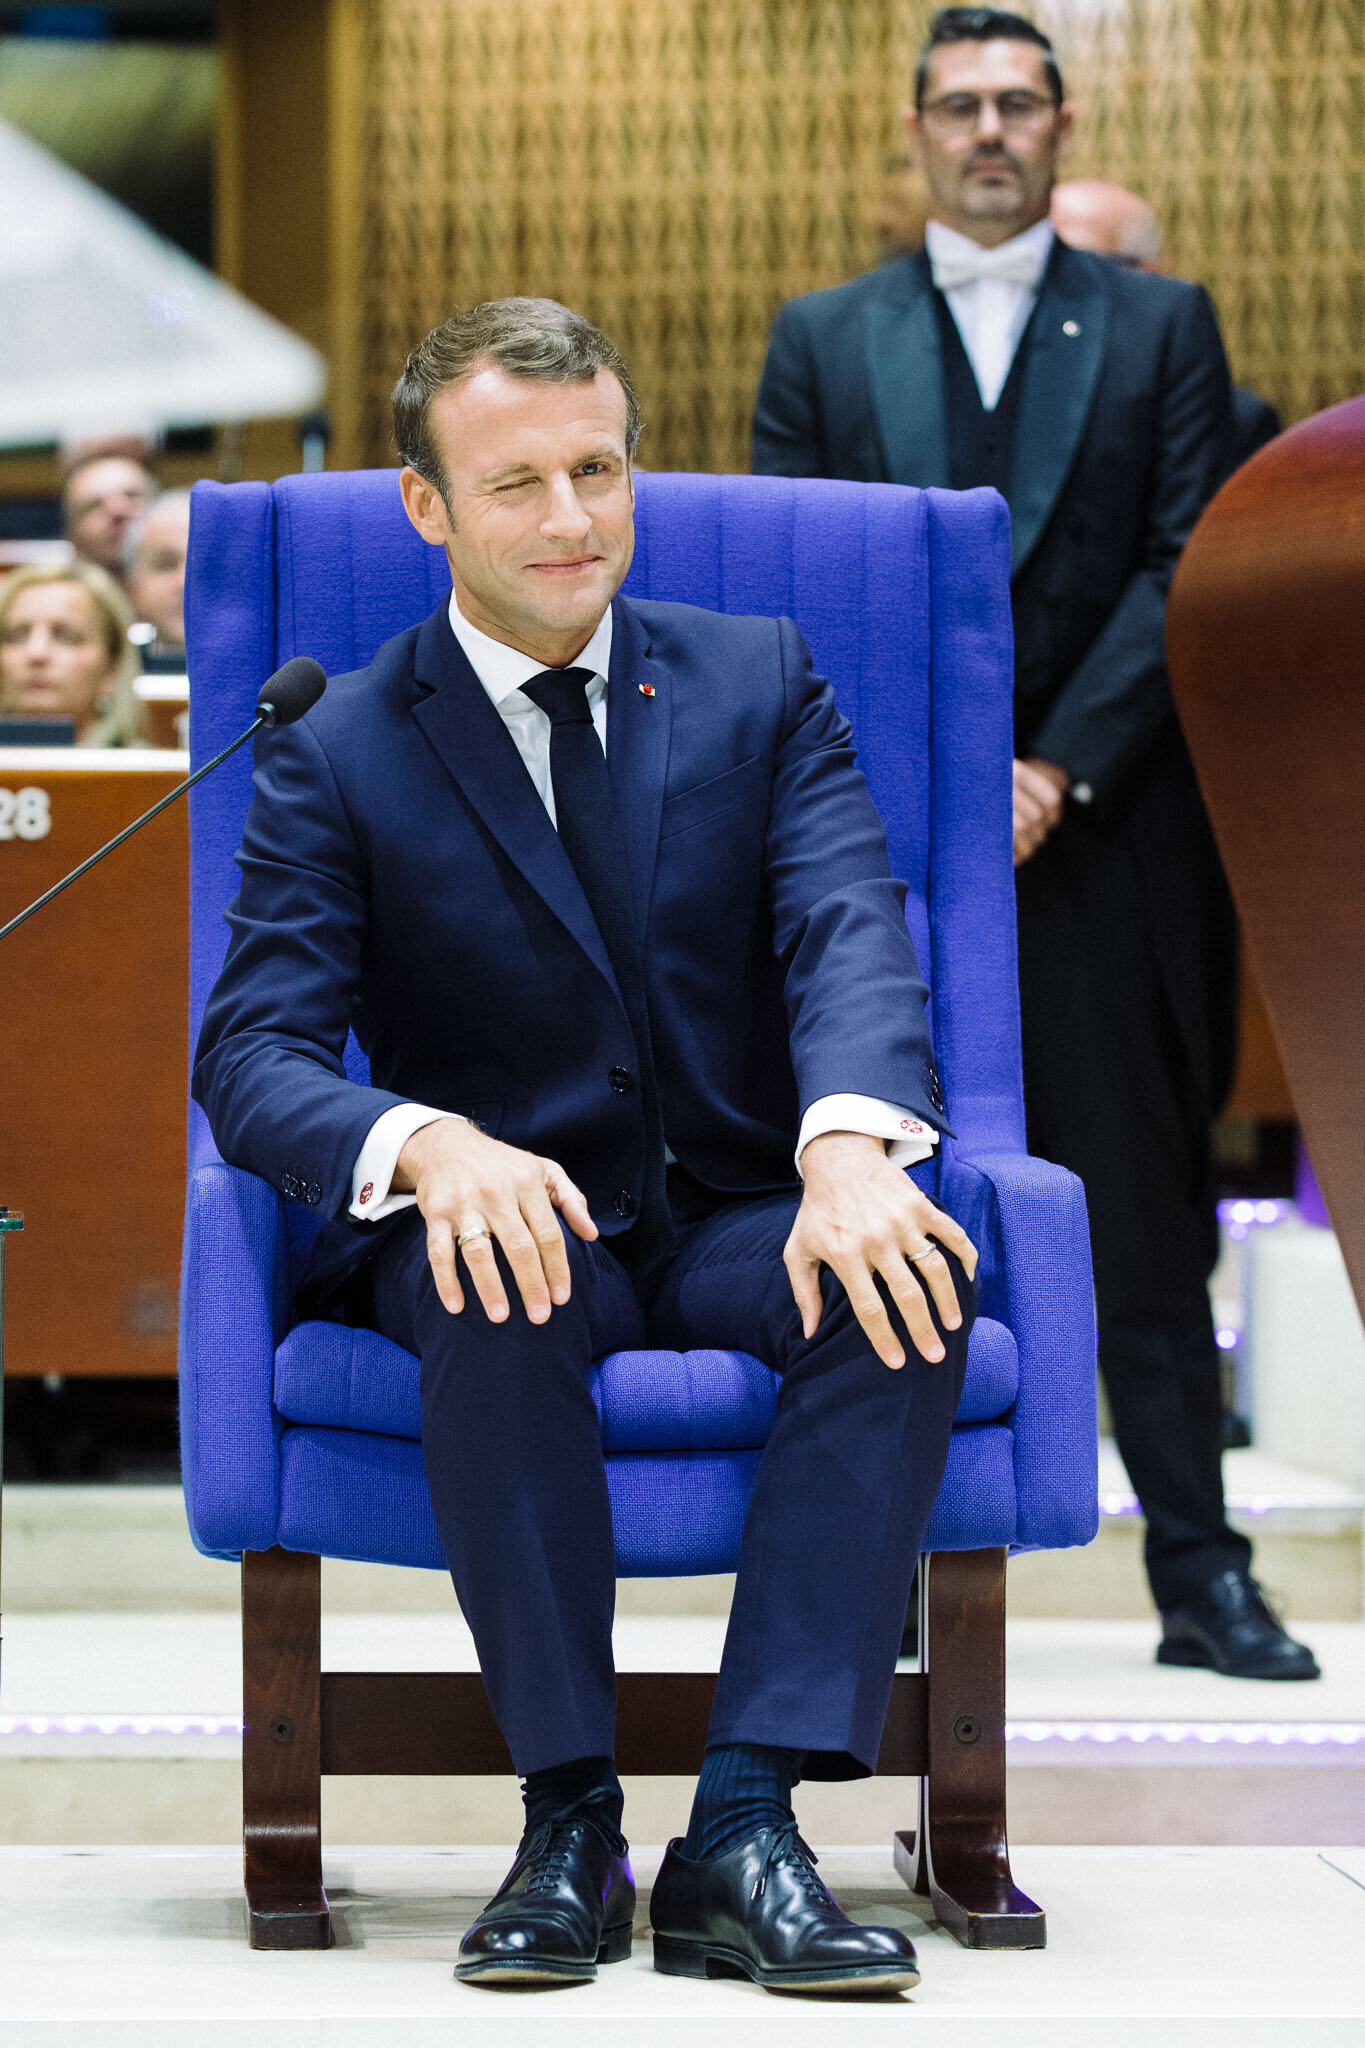 EMMANUEL MACRON AT THE COUNCIL OF EUROPE